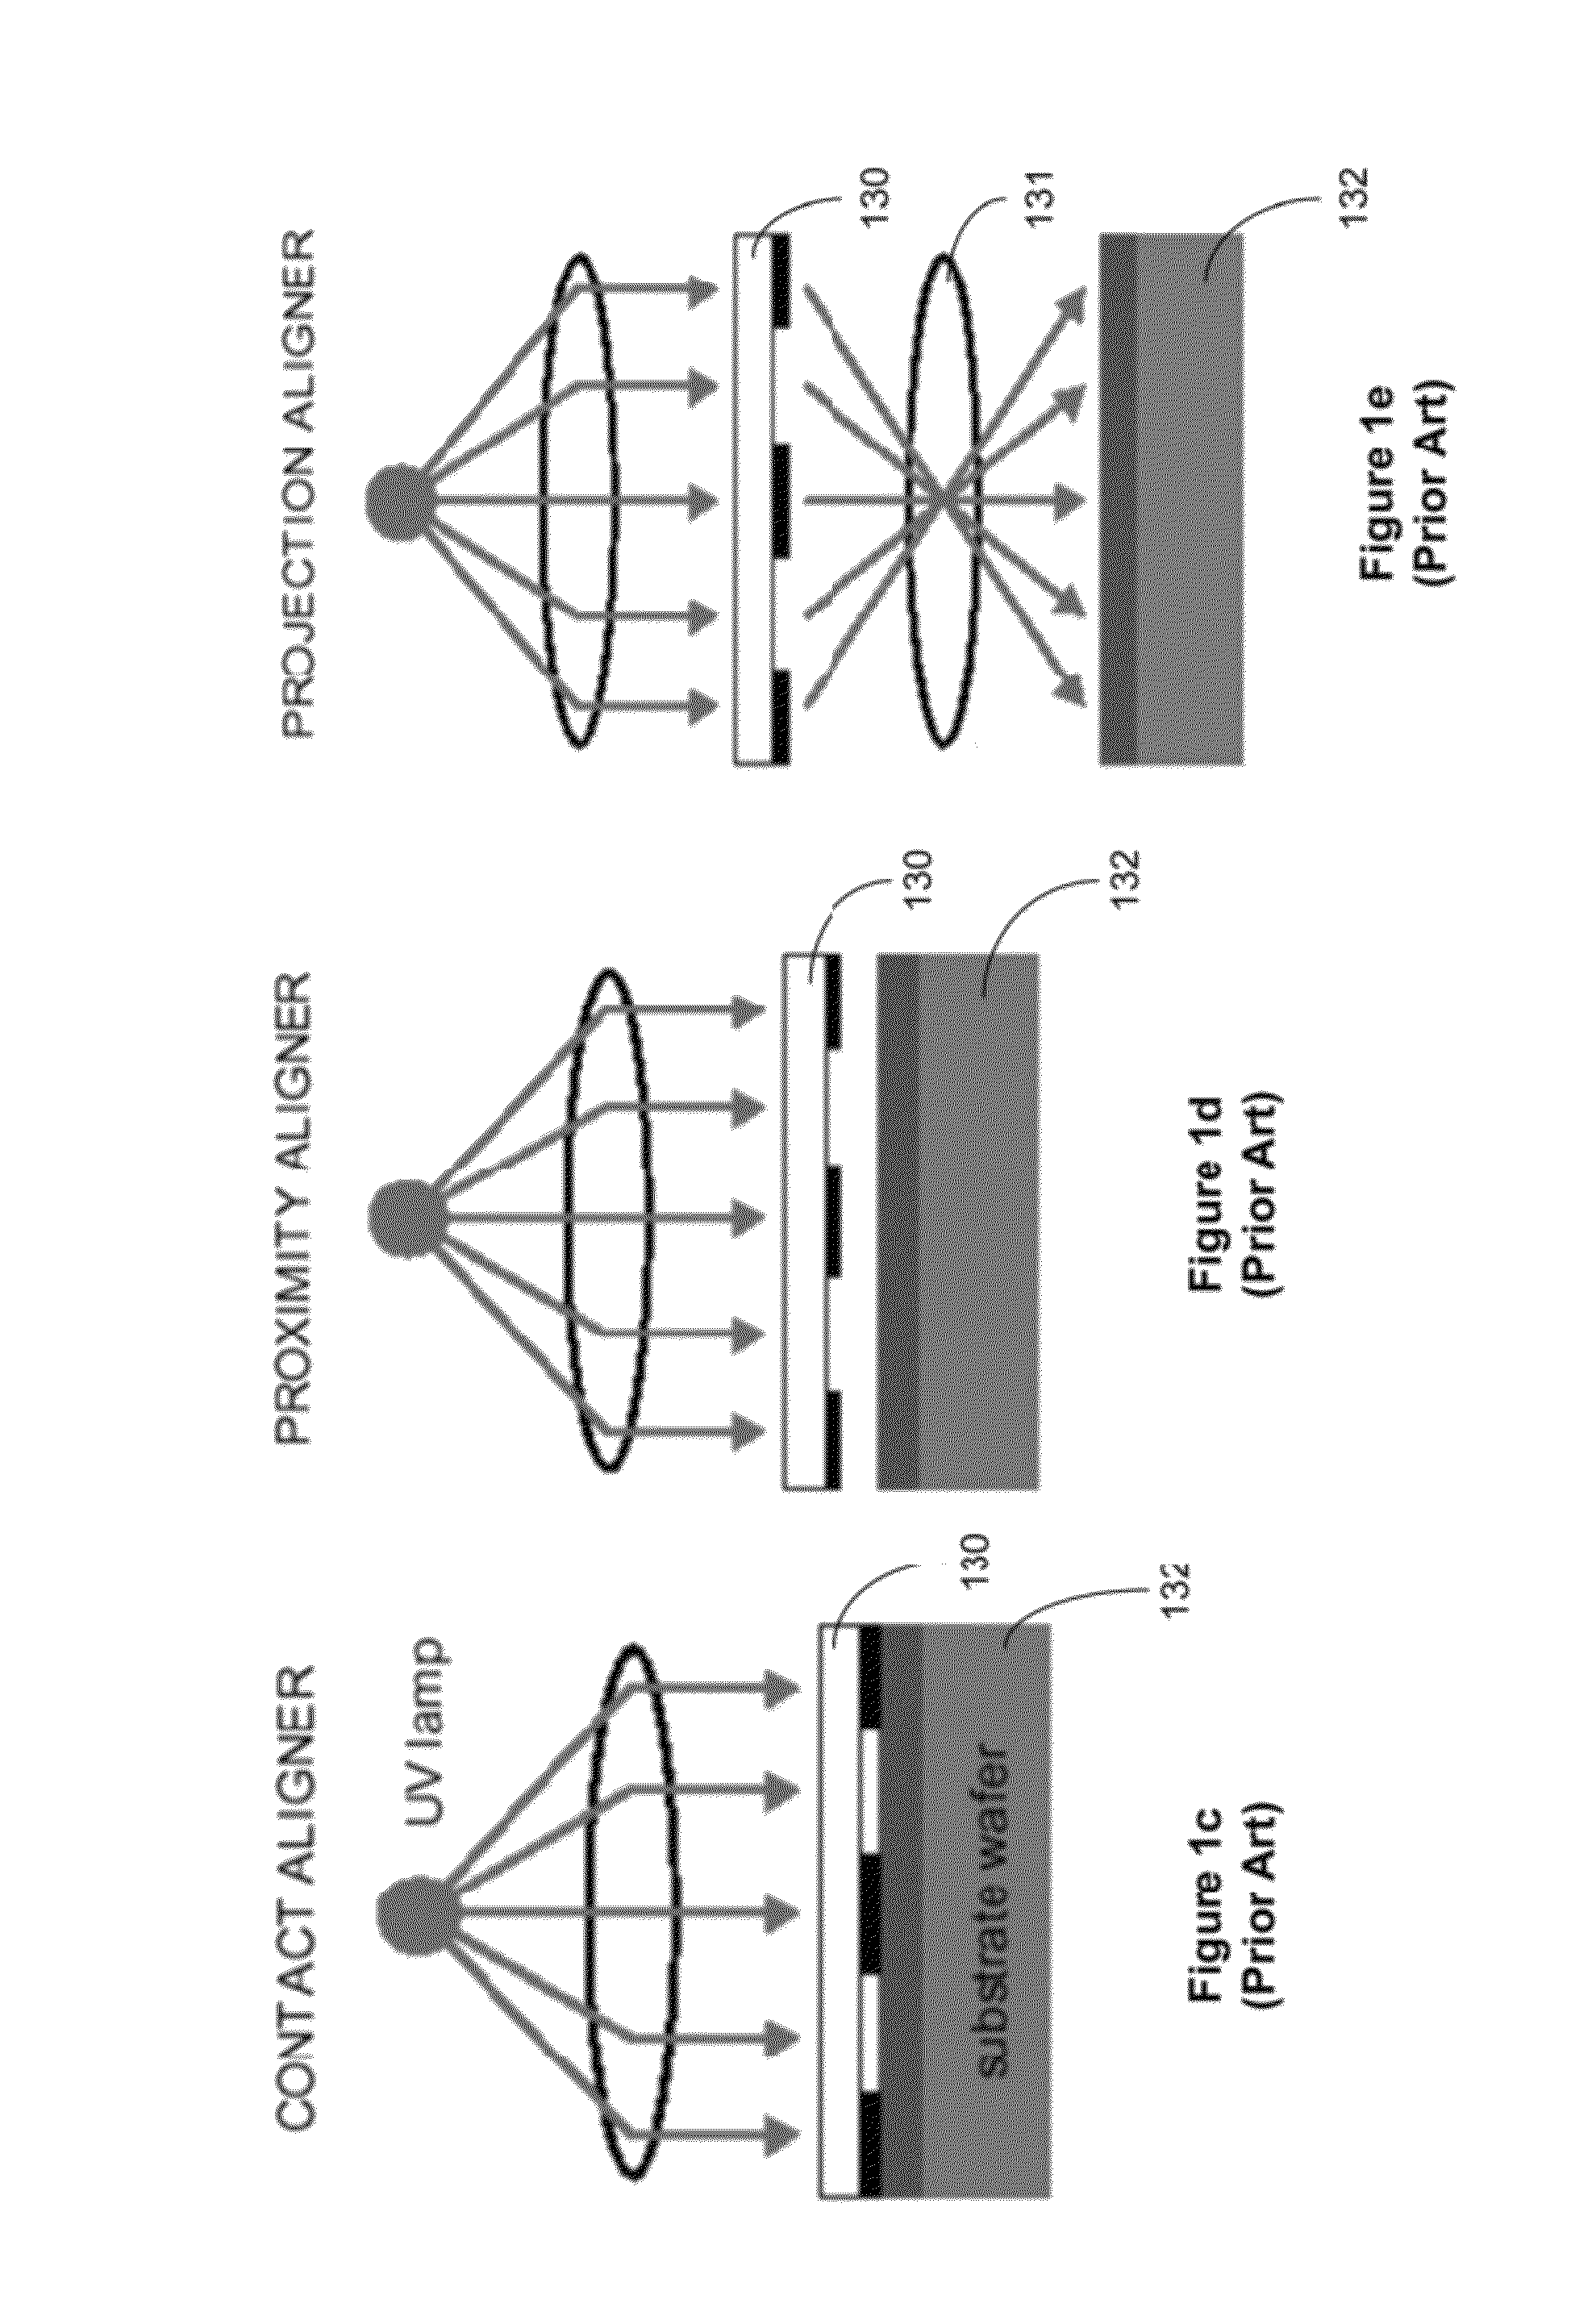 System and method for manufacturing three dimensional integrated circuits